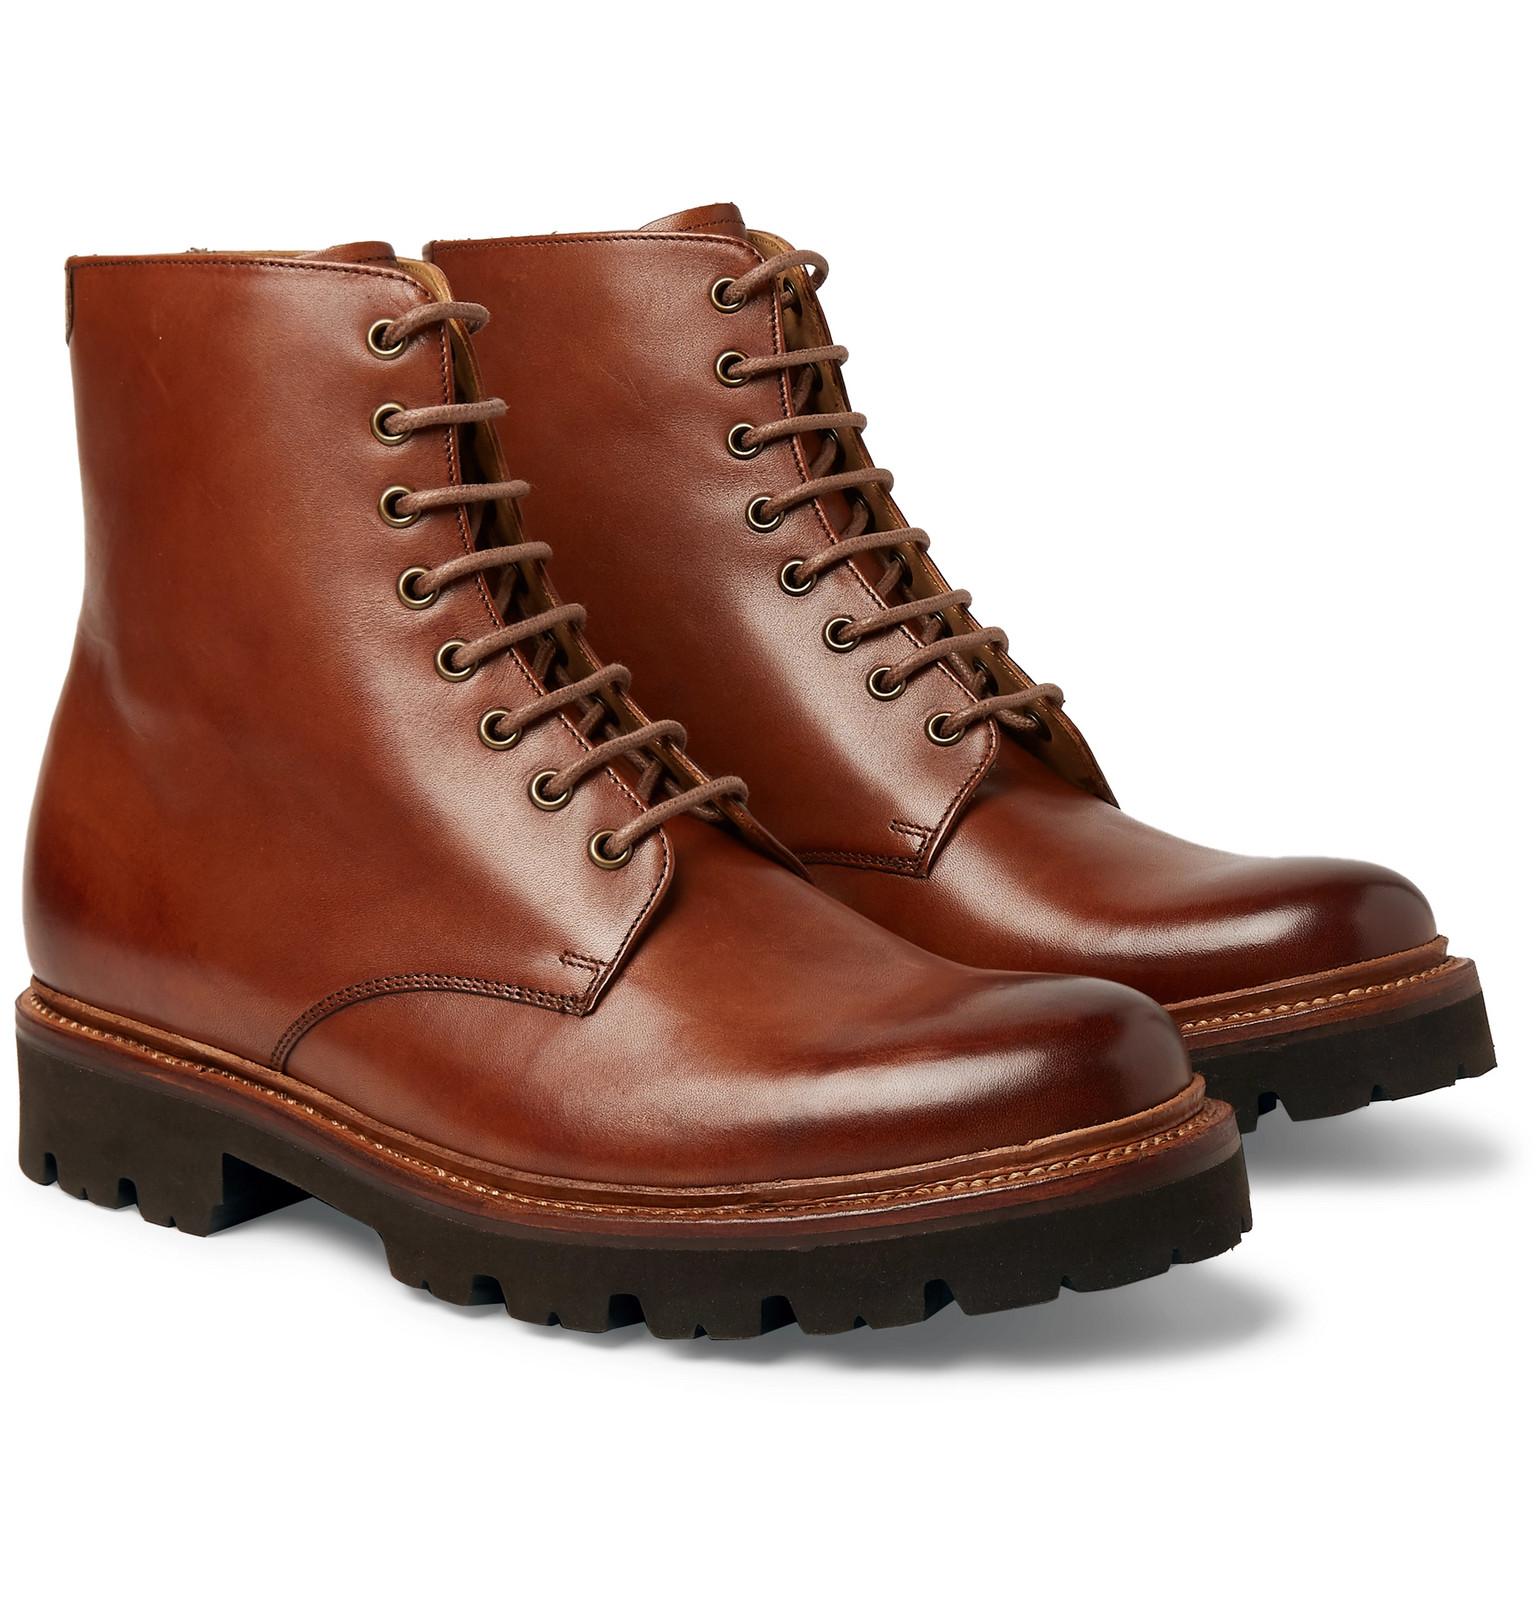 Grenson Hadley Leather Boots in Brown 